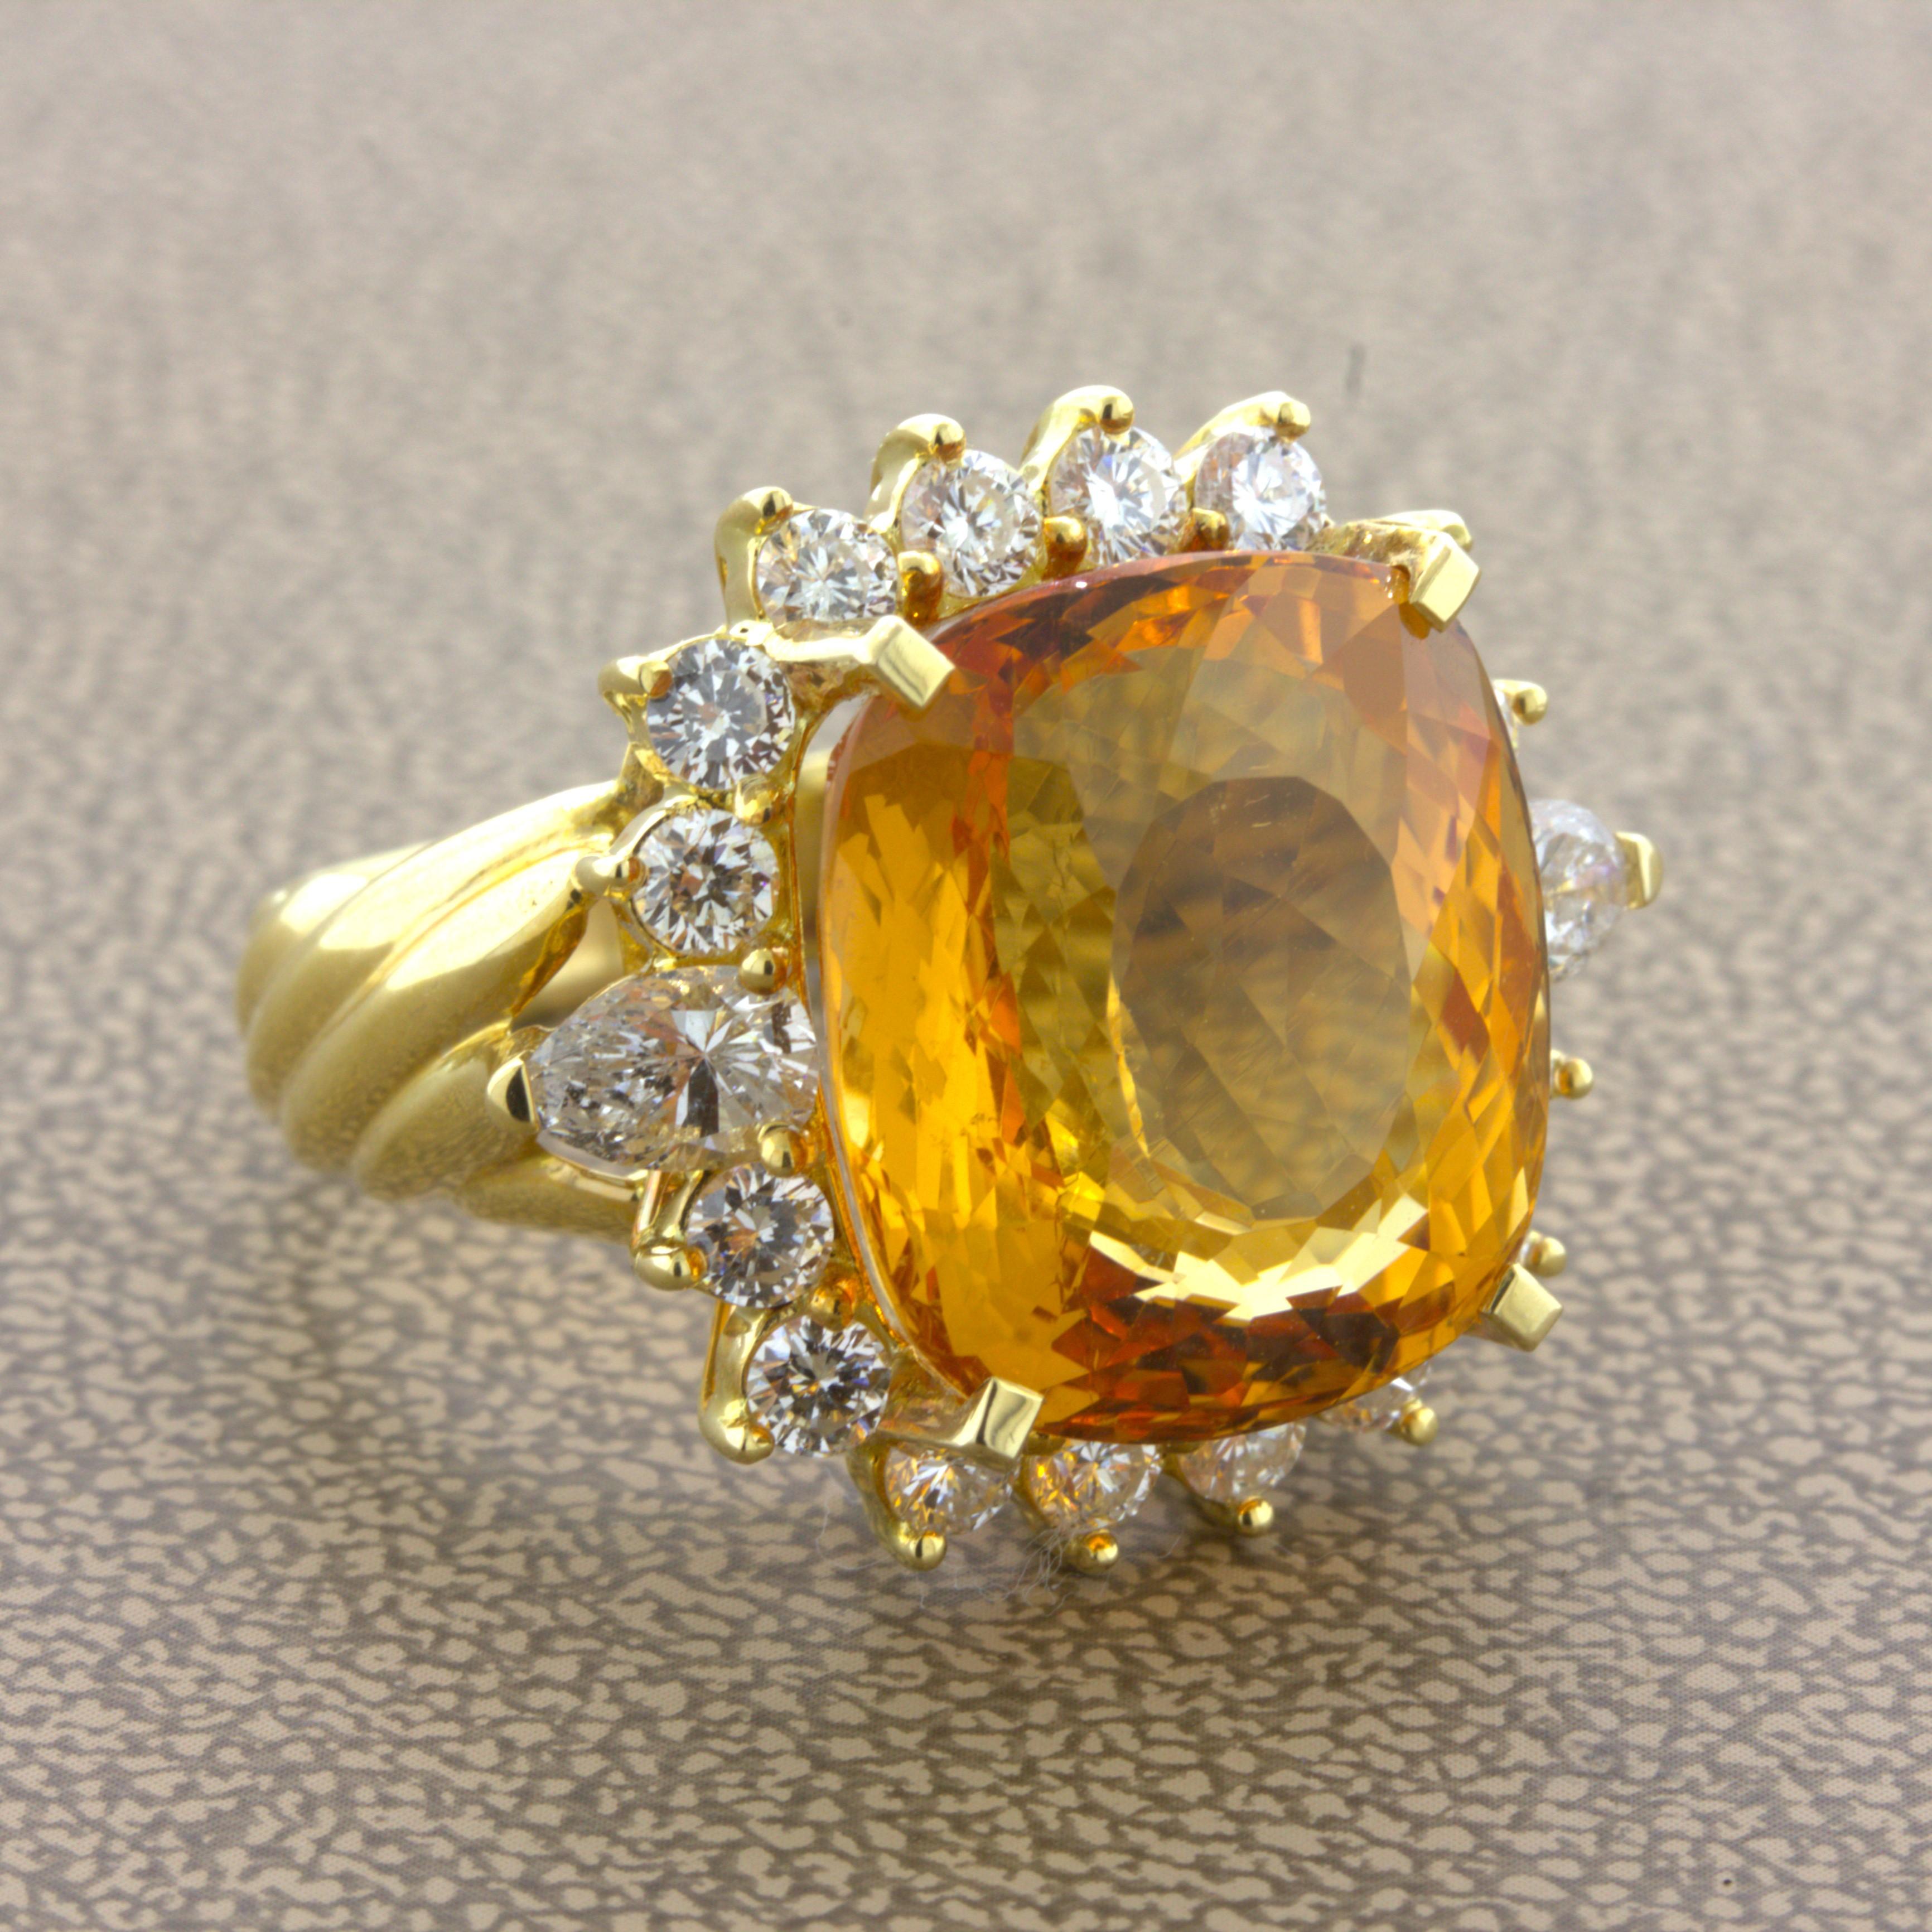 Oval Cut 22.36 Carat Imperial Topaz Diamond 18k Yellow Gold Cocktail Ring